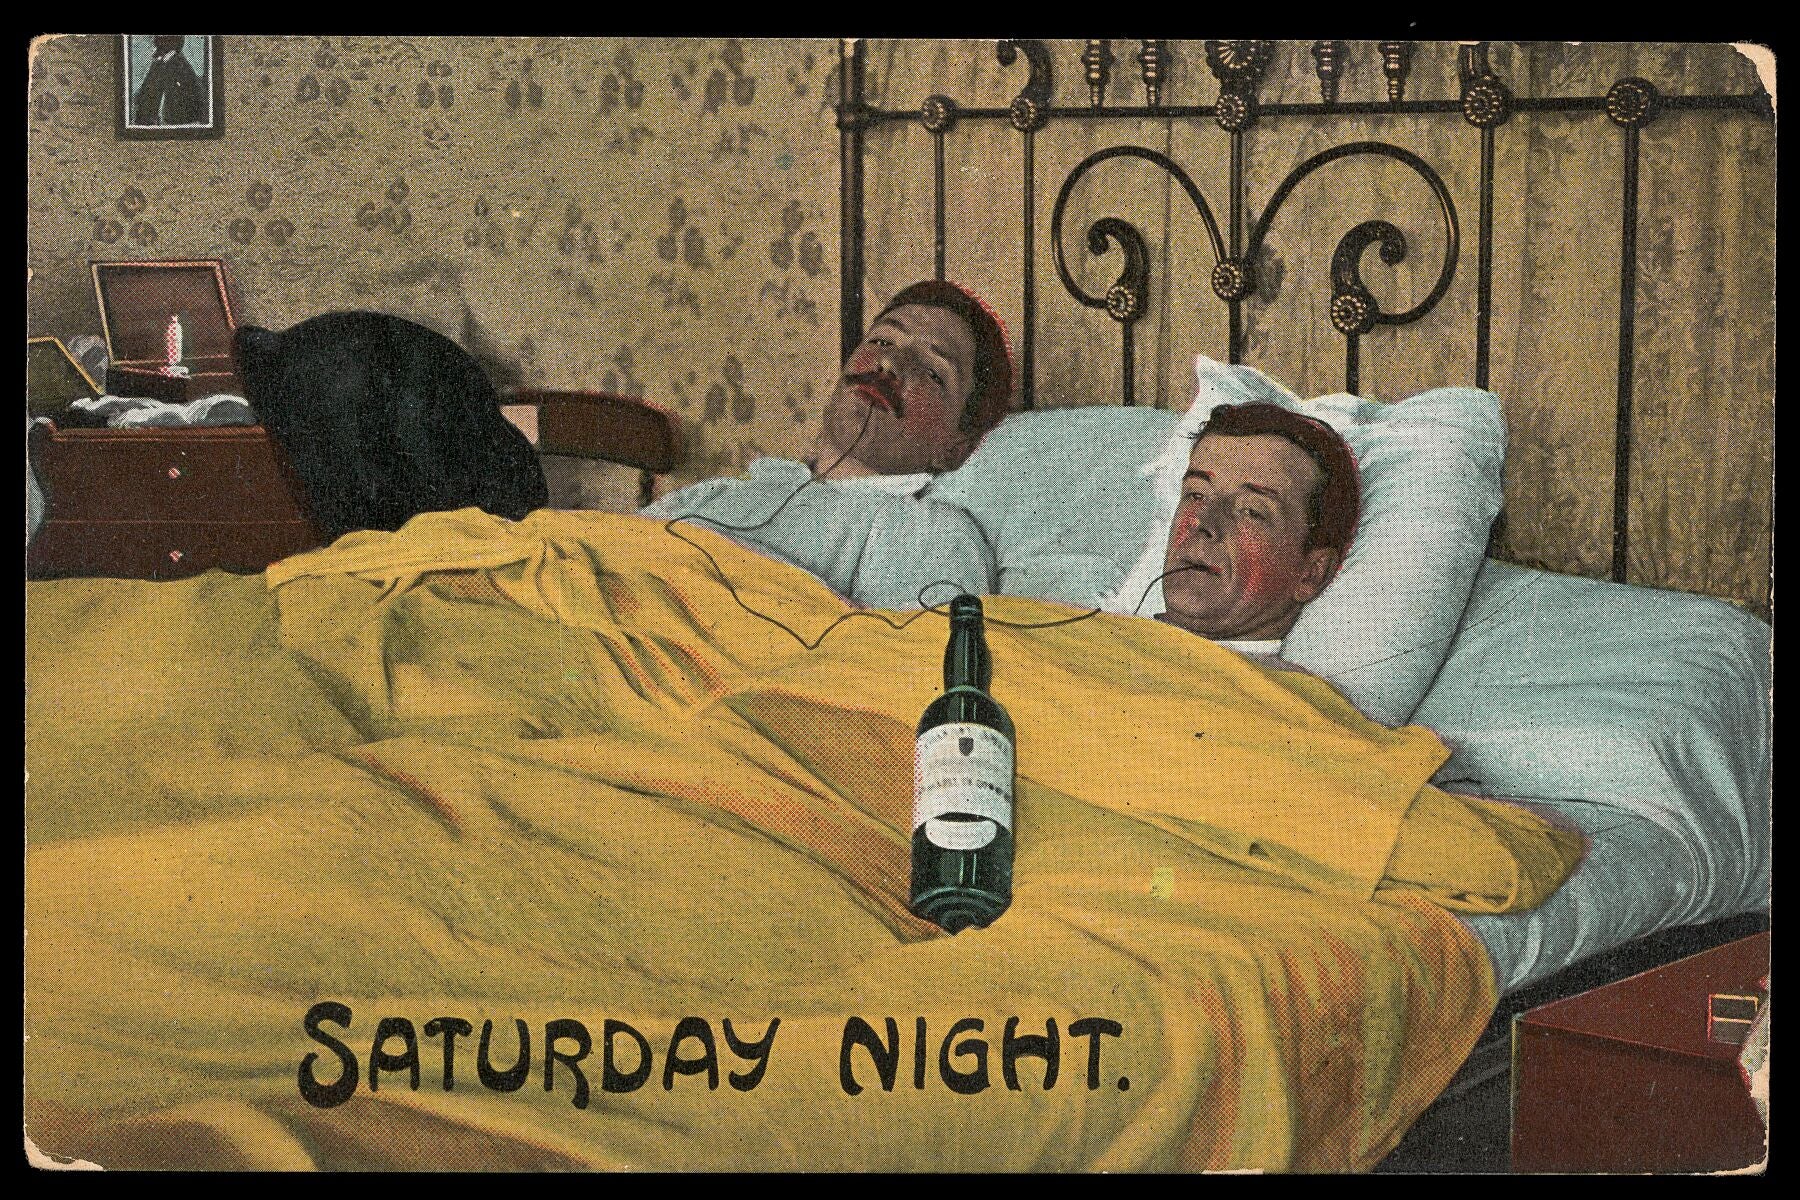 Two Men in Bed on a Saturday Not Drinking from a Bottle of Alcohol - 1908